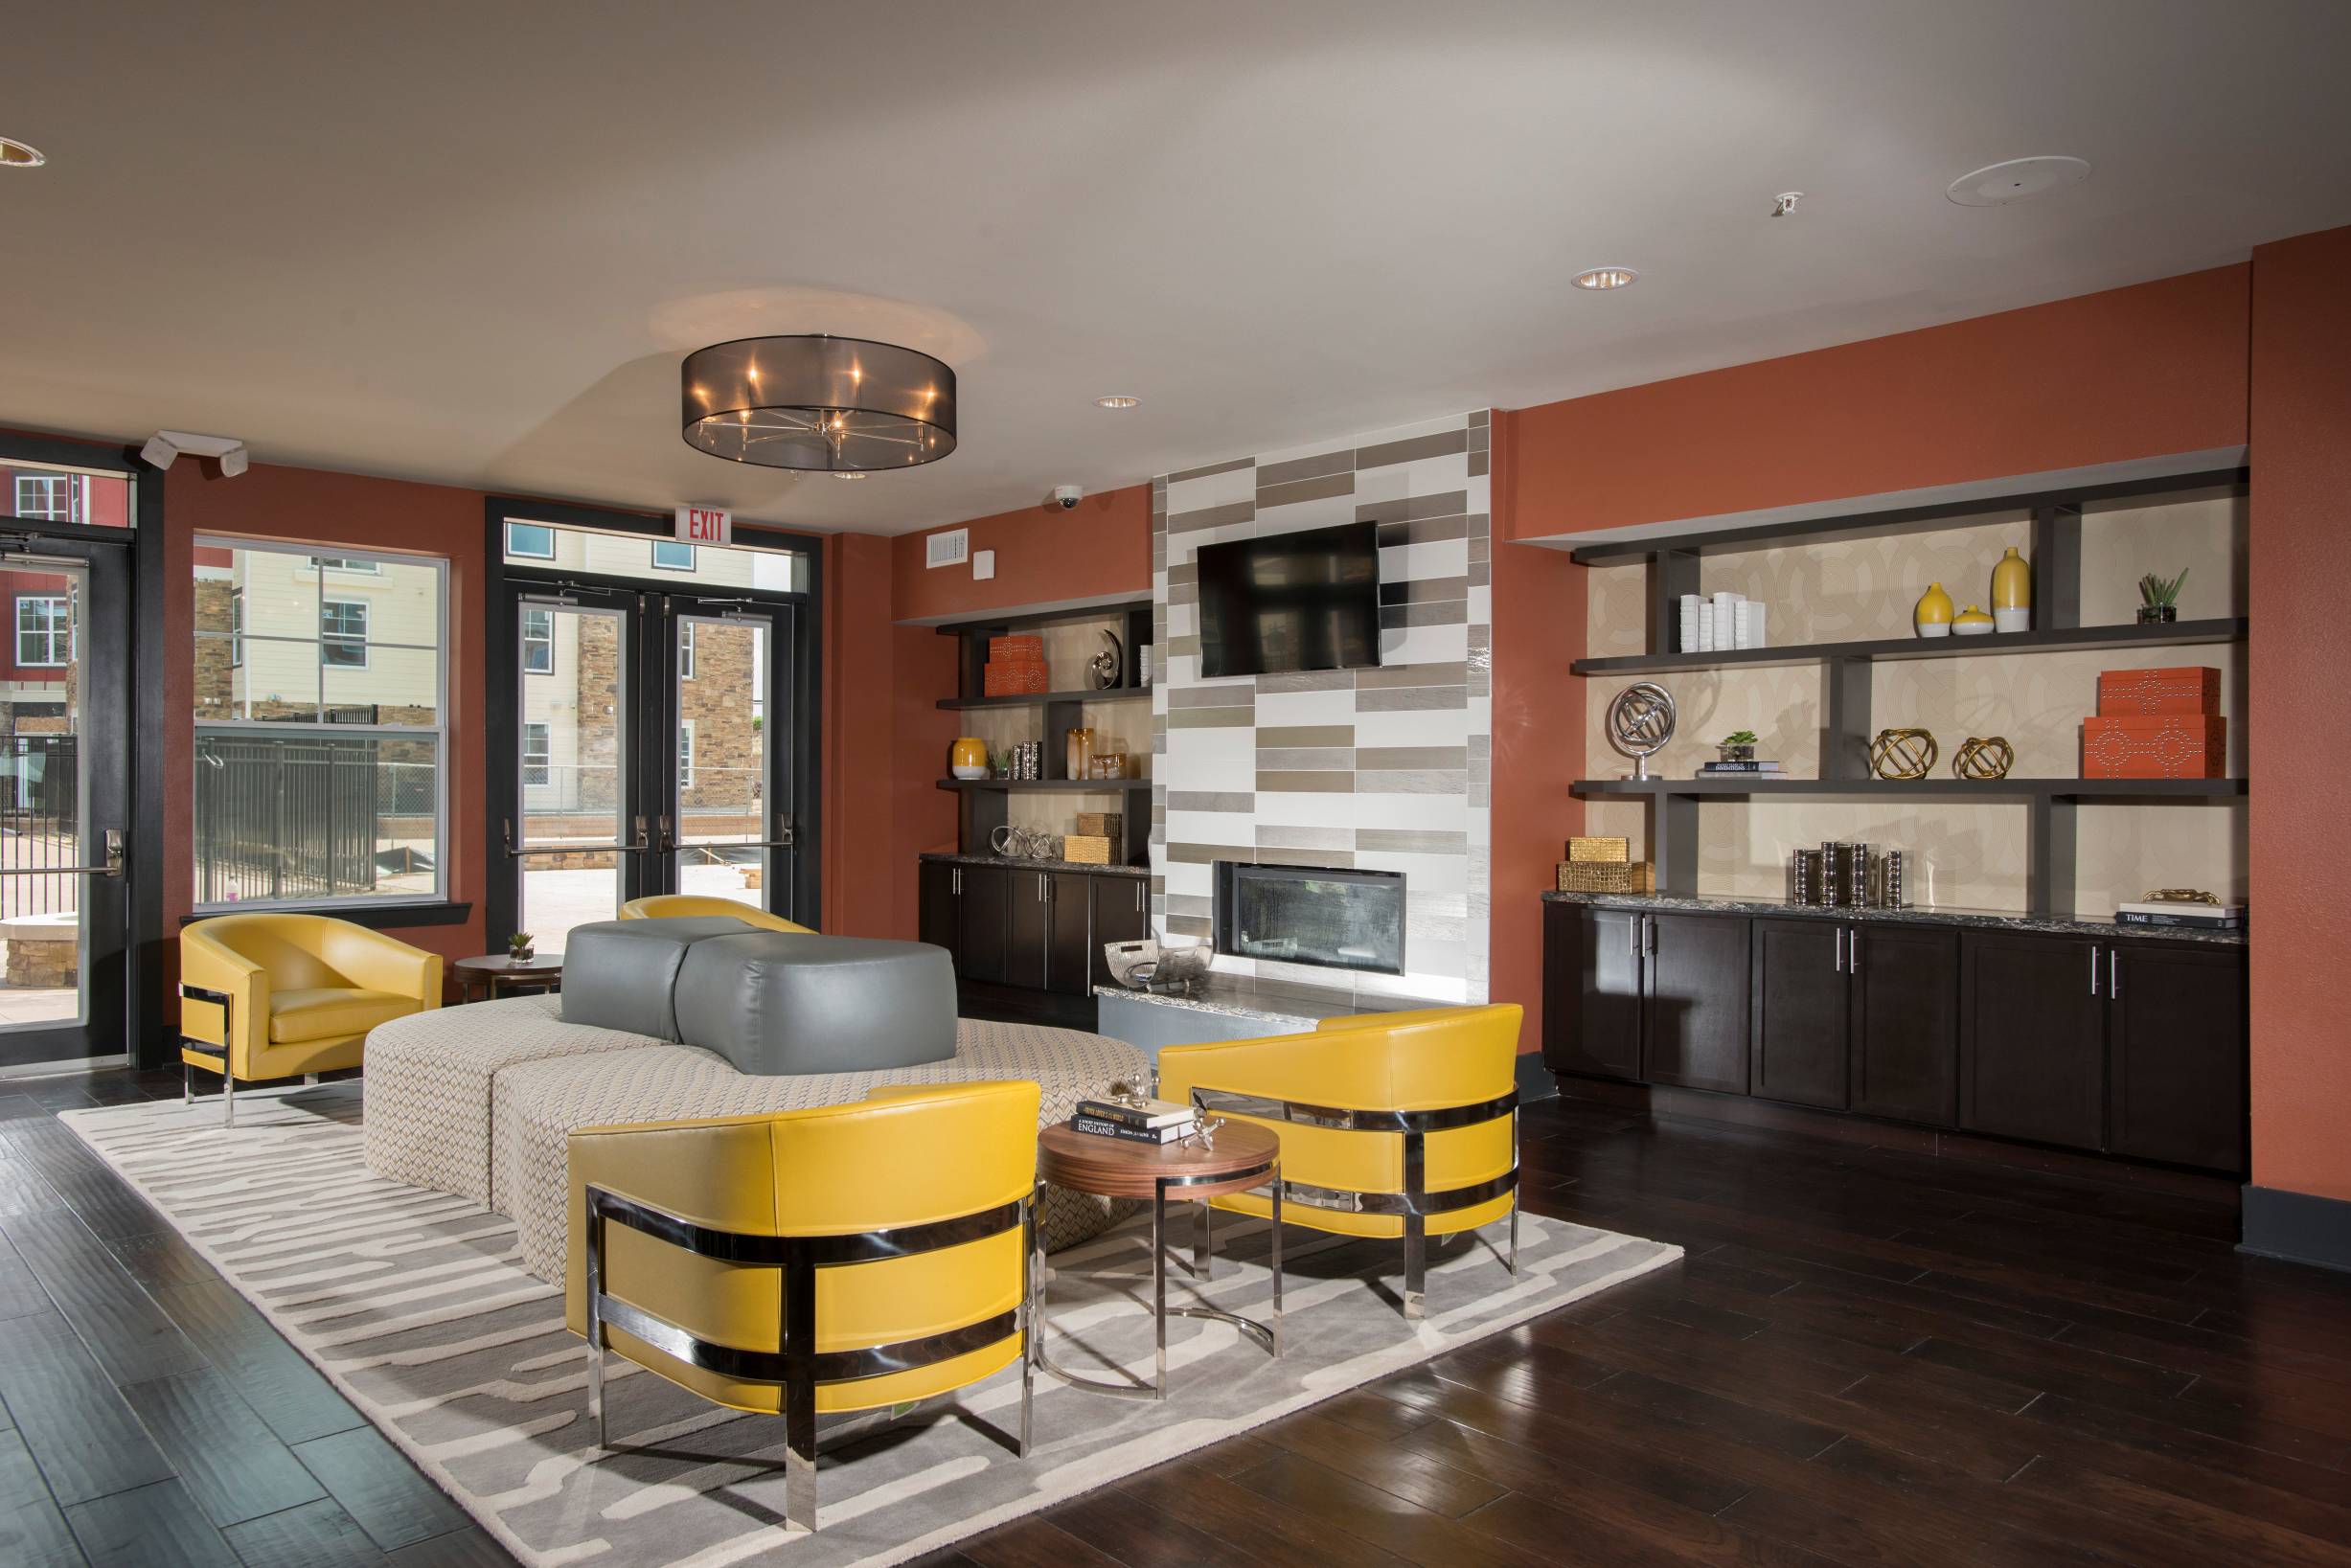 The Den in Columbia, MO features deco-esque bold lines and colors